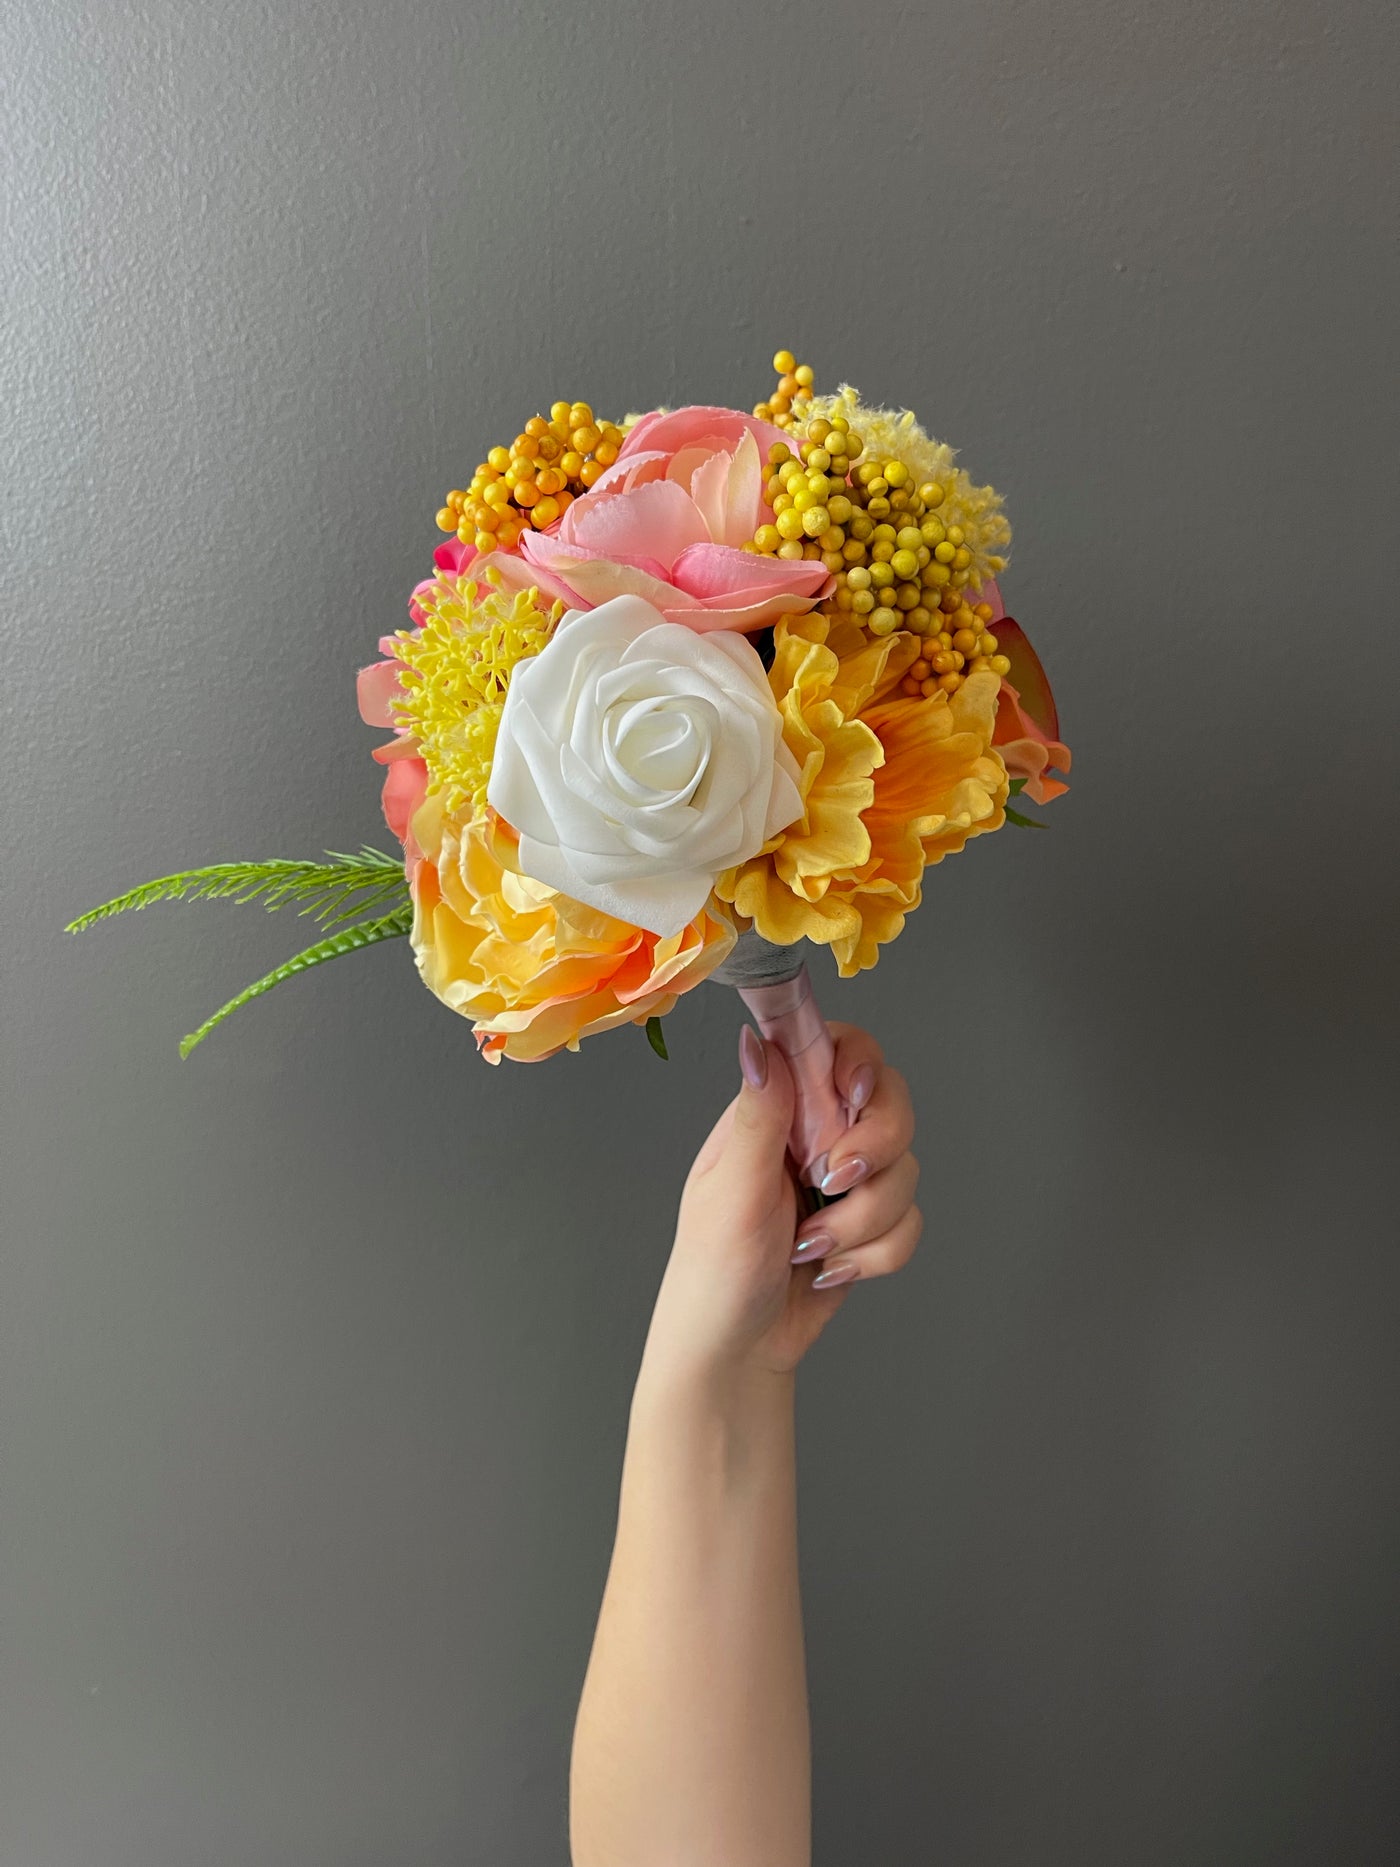 Rent  A Rose- Flower Girl Bouquet- Pink, yellow, orange and white. Rent for five days for $35.00